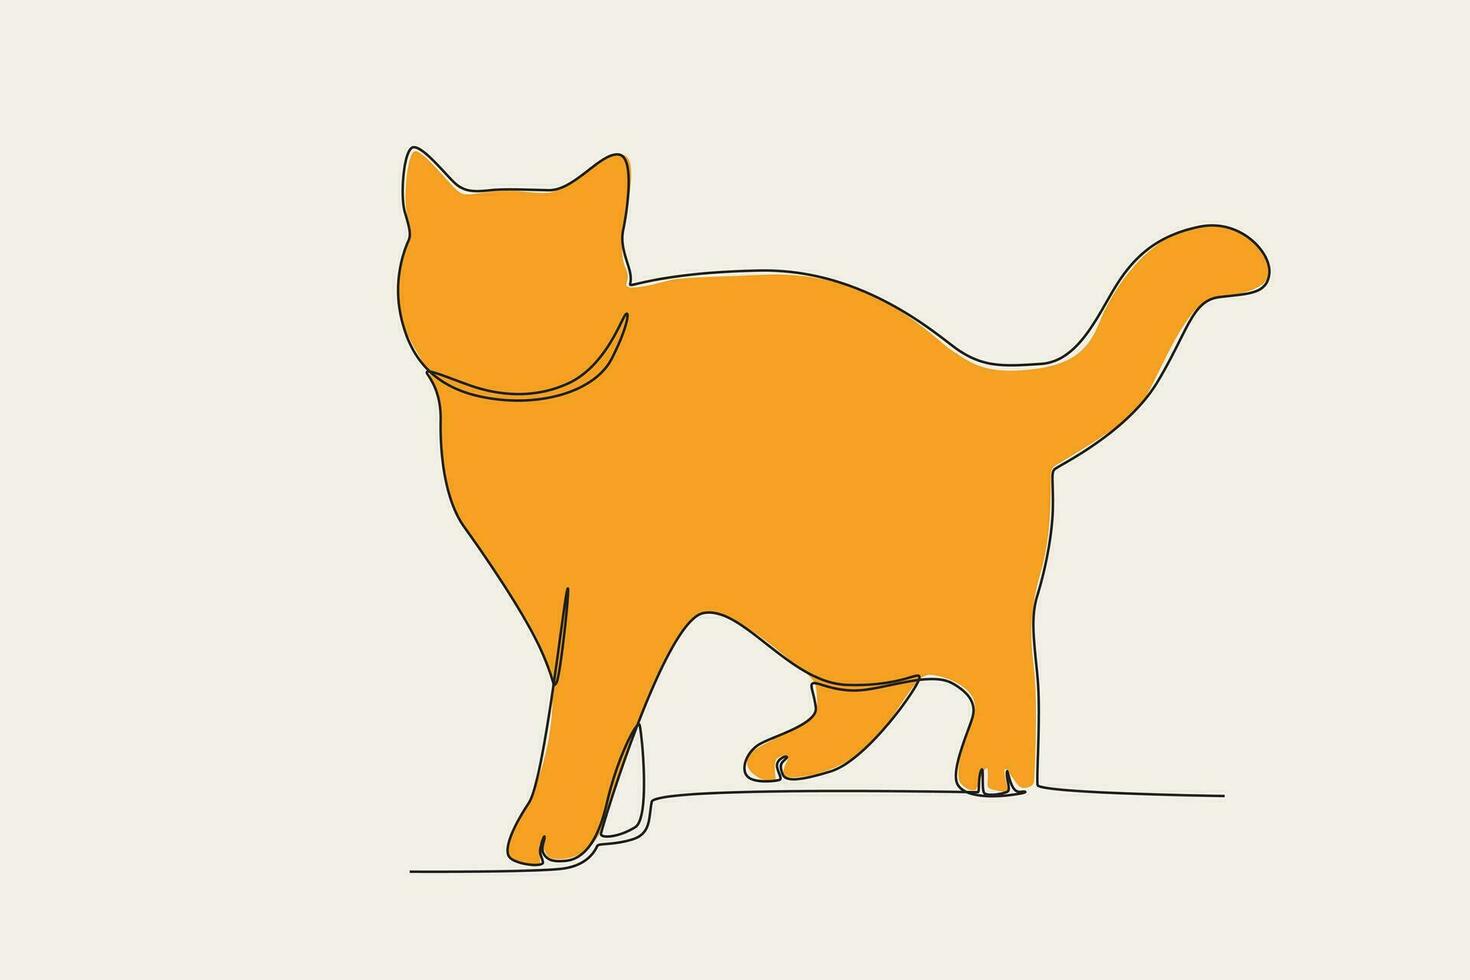 Colored illustration of a pet cat vector